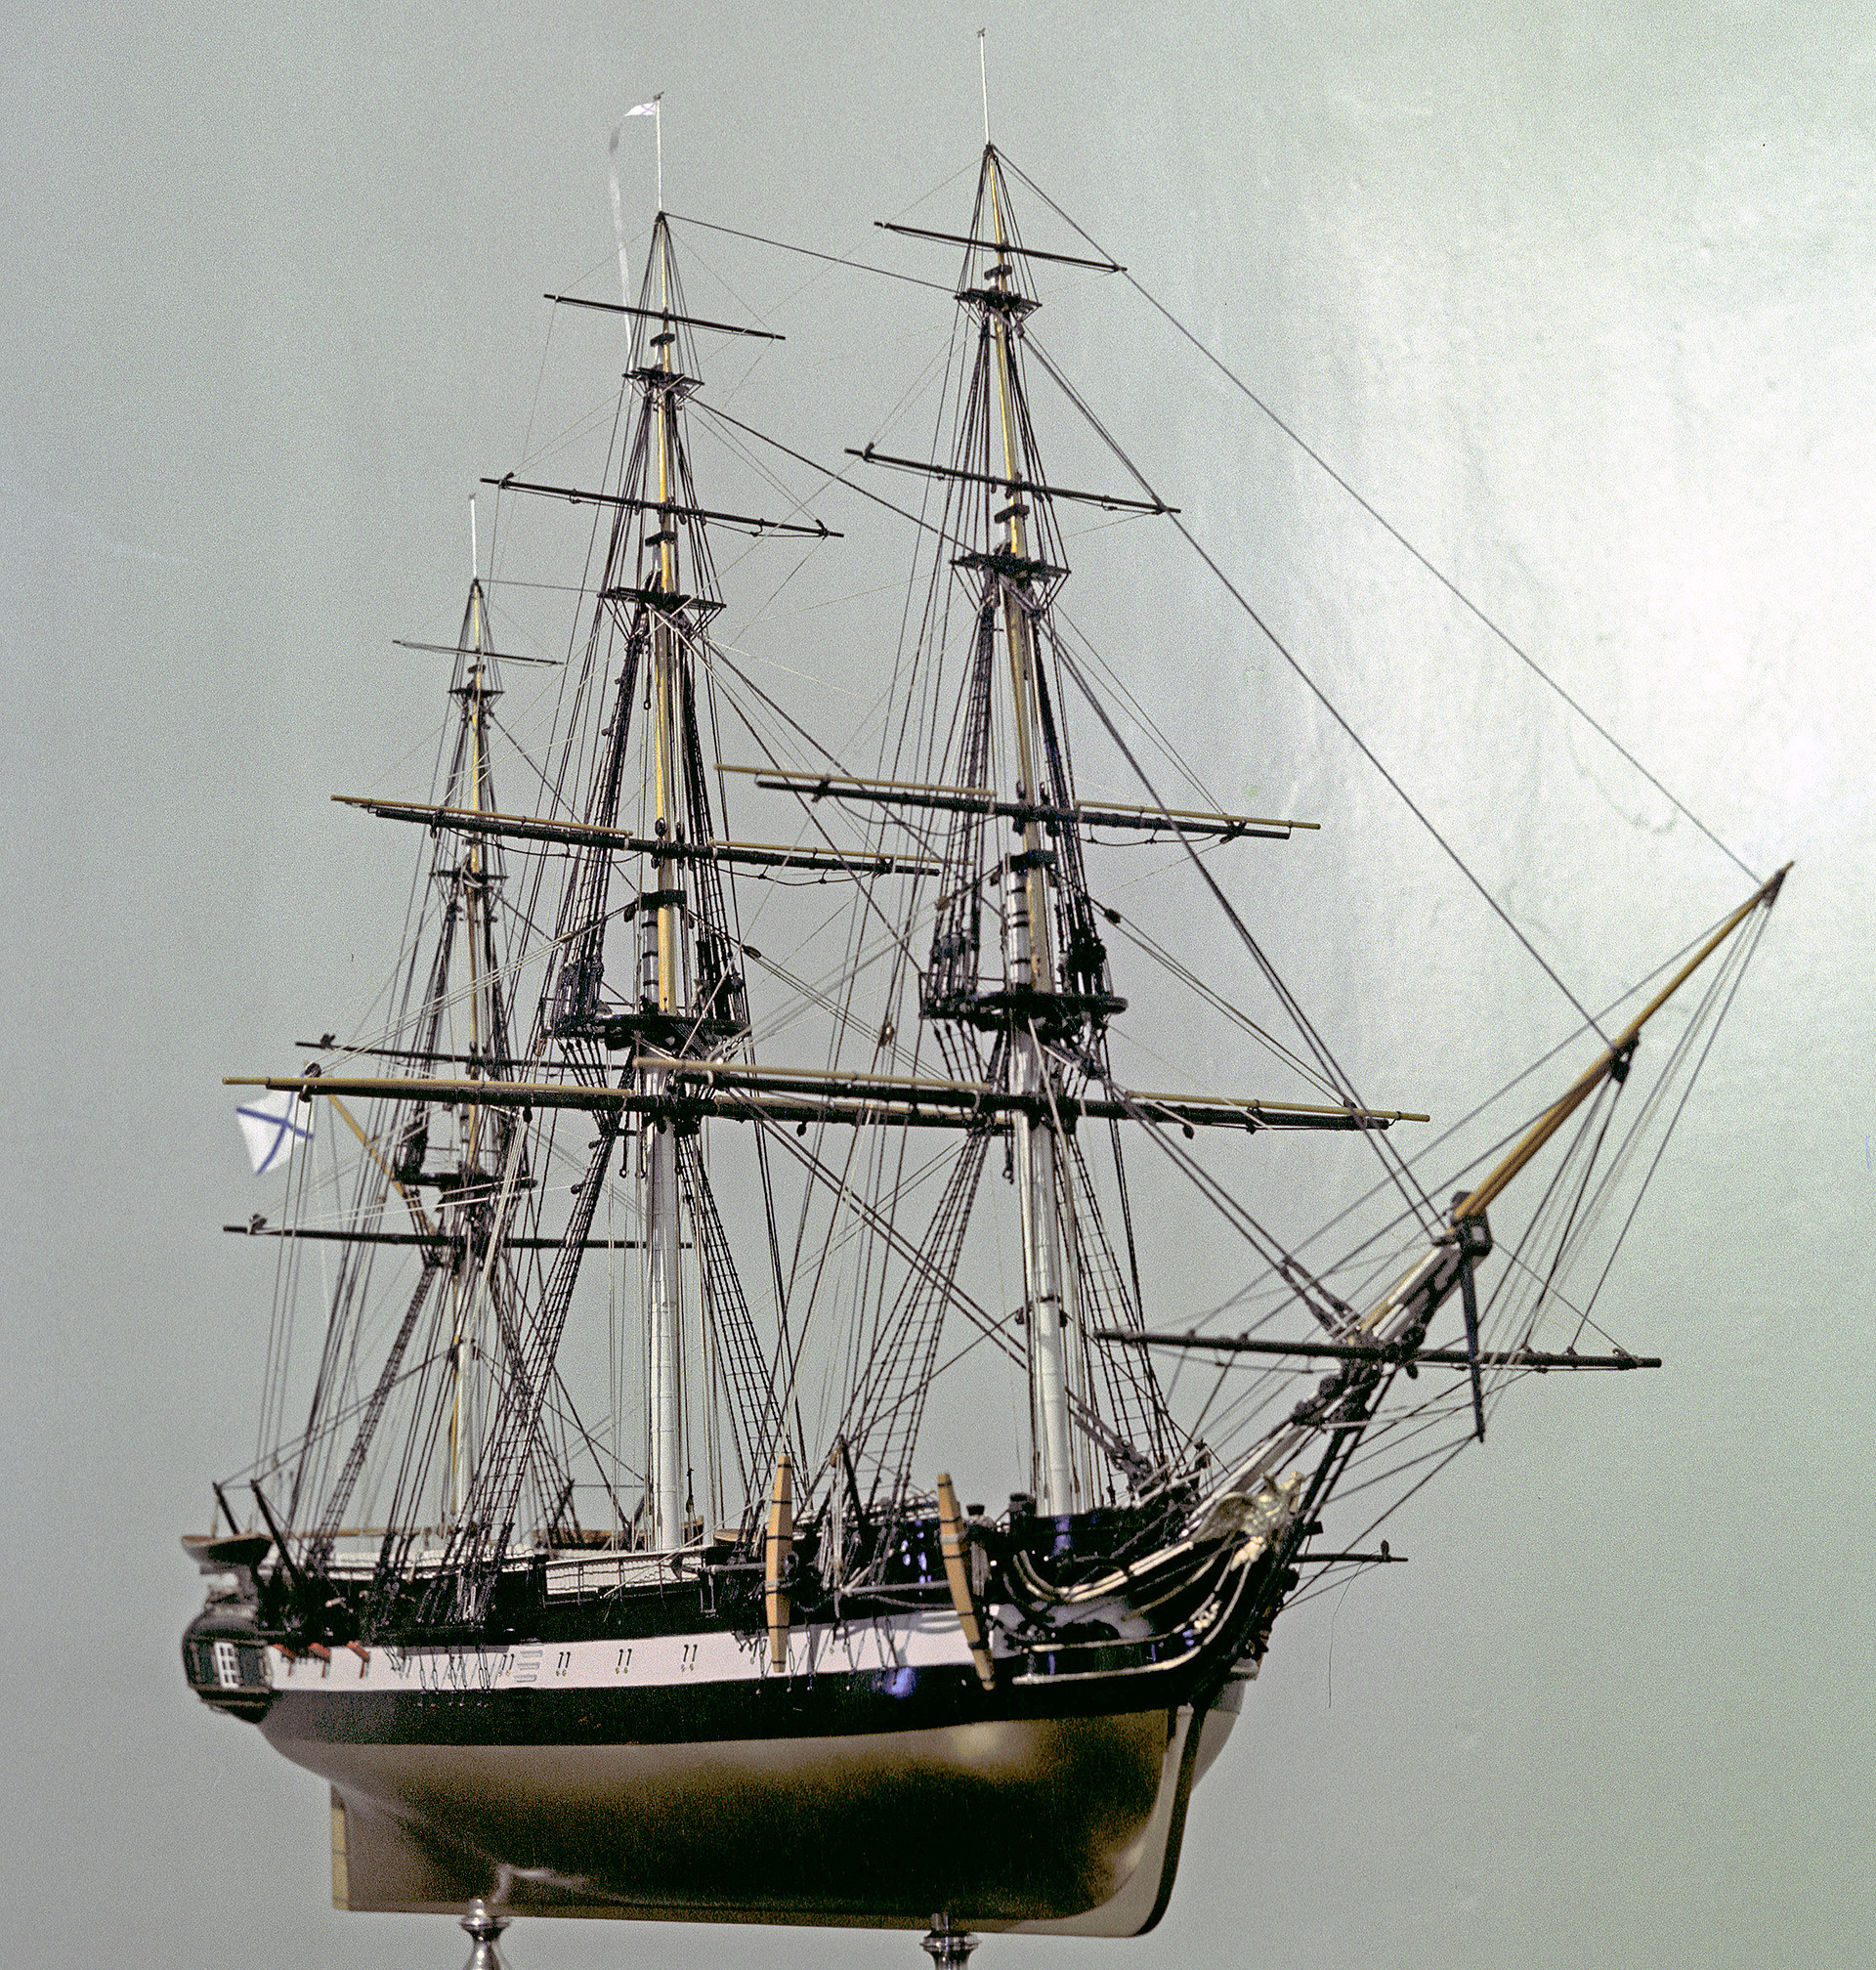 A model of a sloop-of-war Vostok in the Central Navy Museum in Leningrad in 1970.